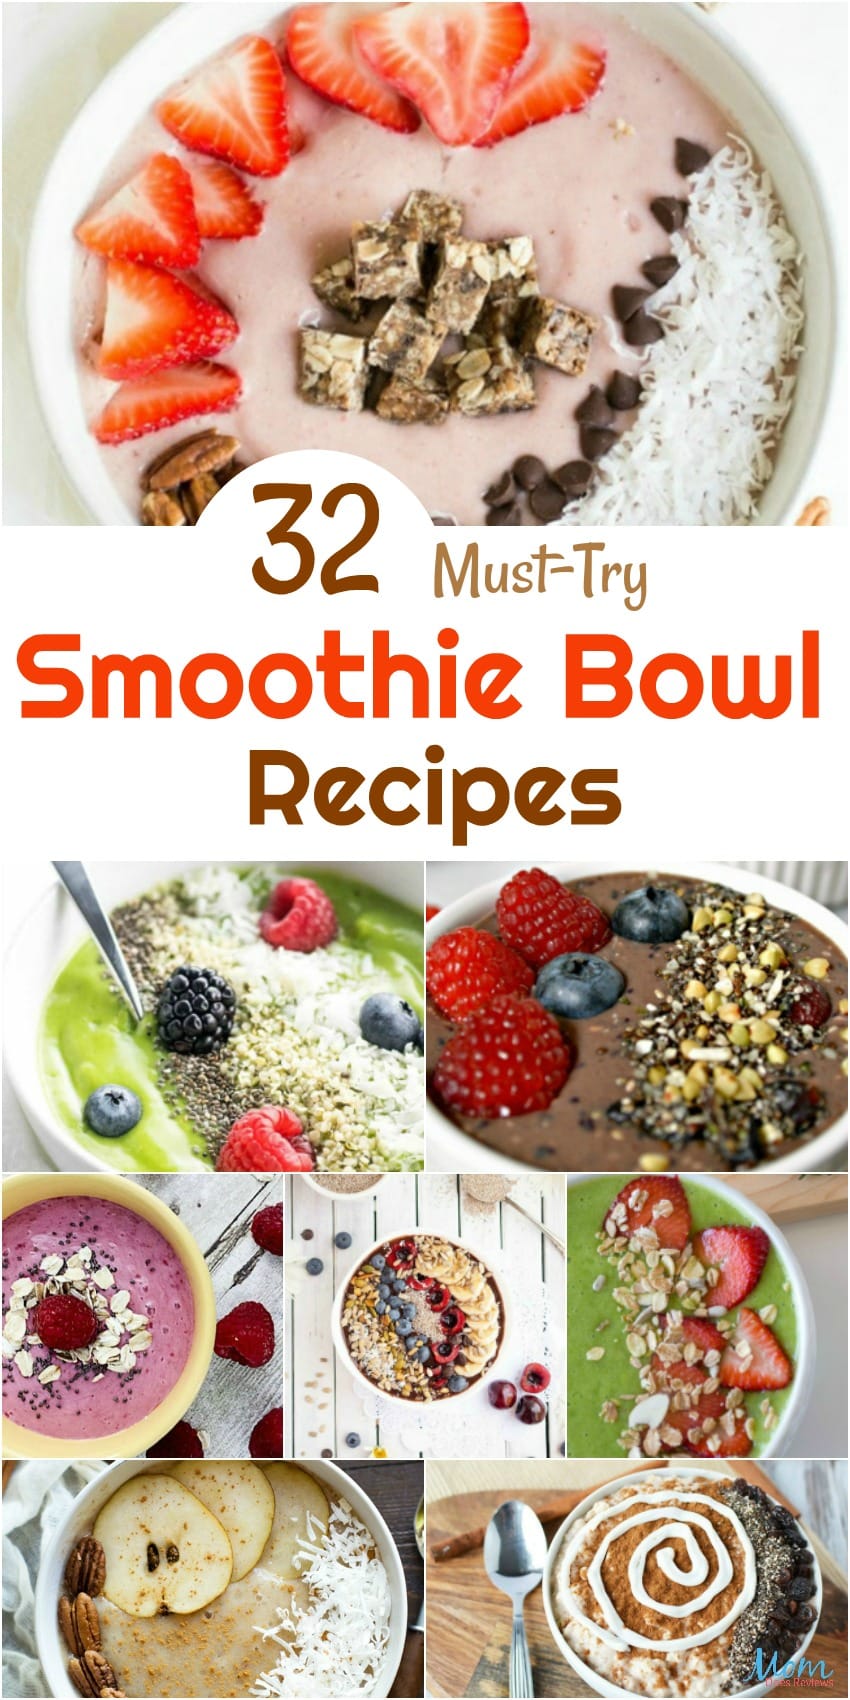 32 Must-Try Smoothie Bowl Recipes You Will Love #recipes #smoothies #smoothiebowls #breakfast #foodie